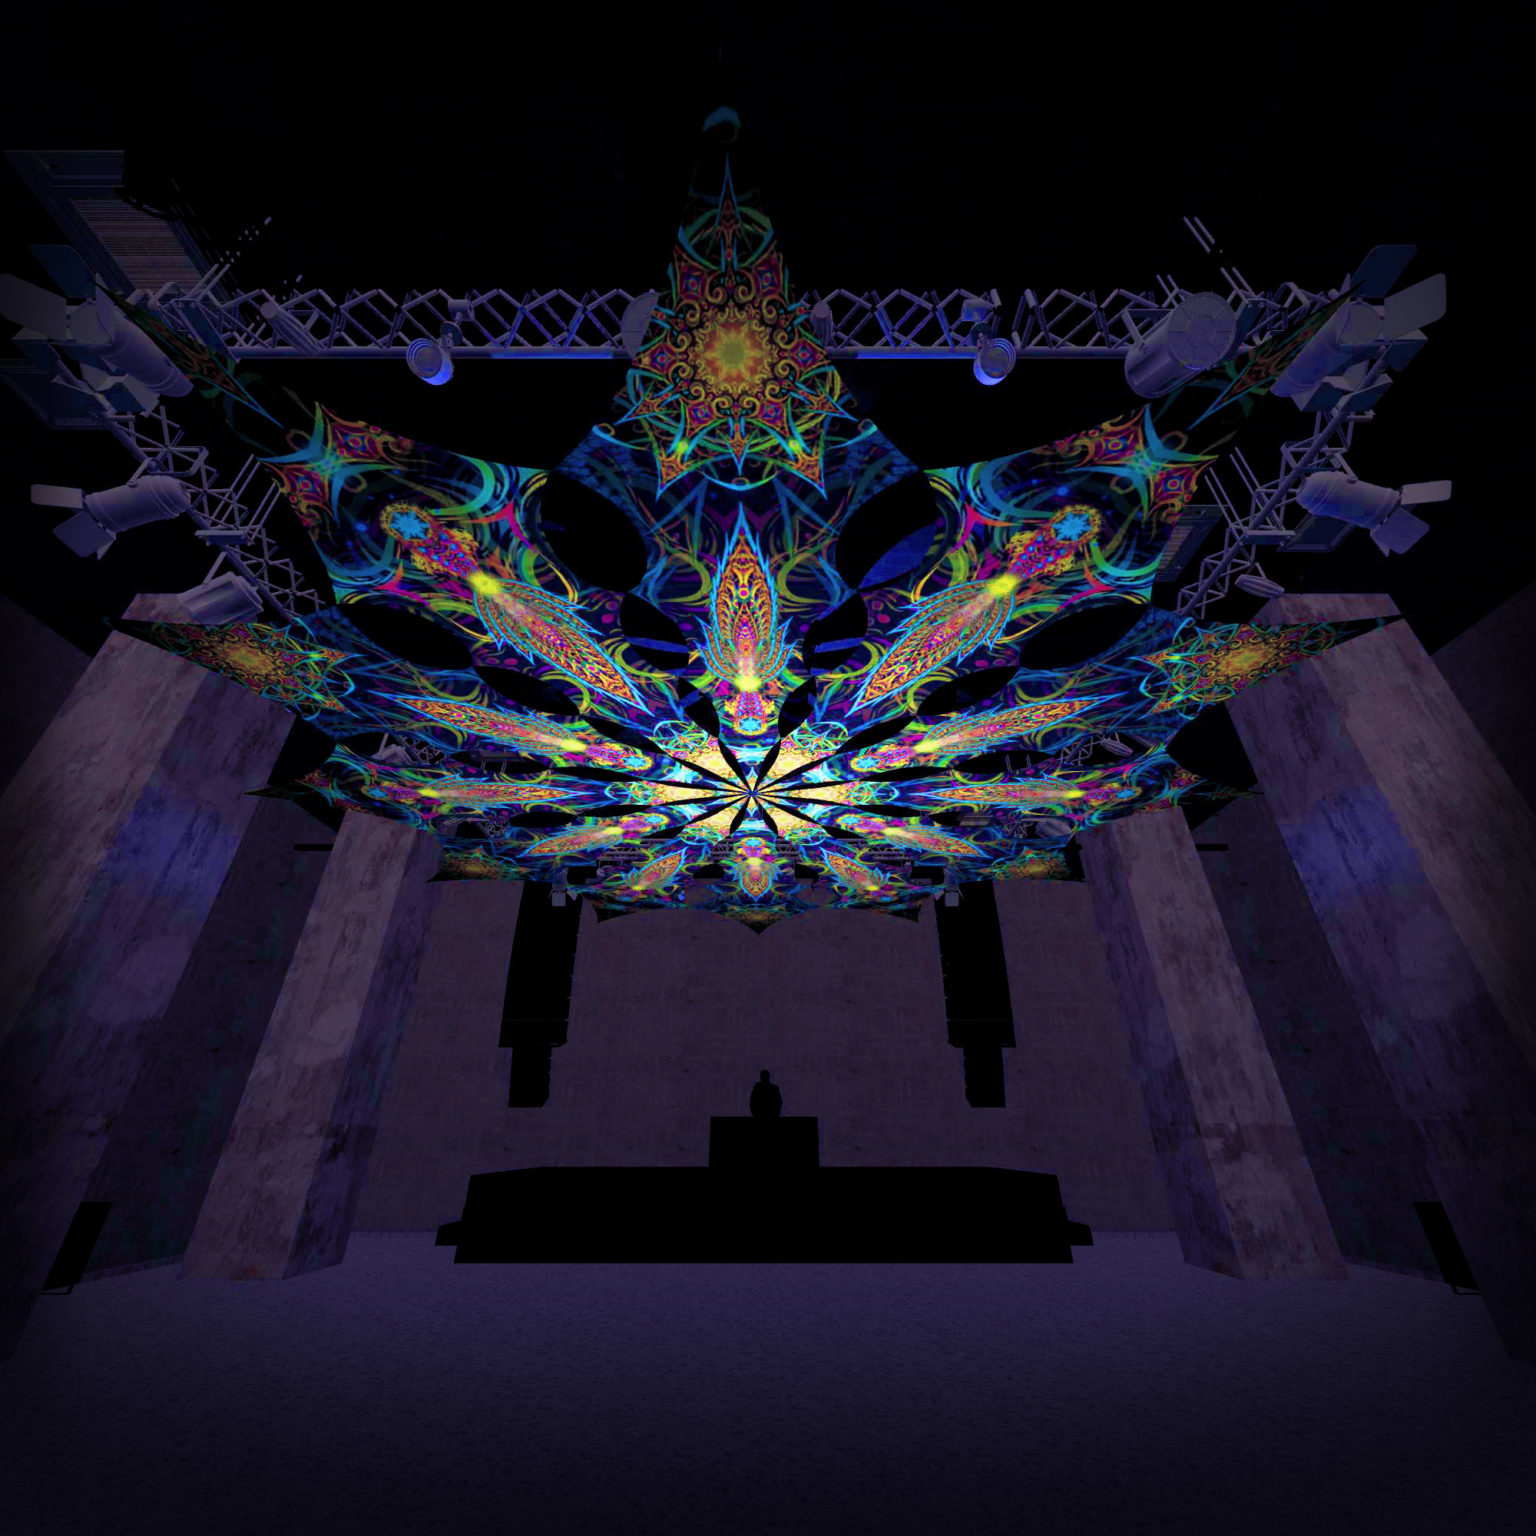 Reincarnation 2 - Leaf&Star -Psychedelic UV Canopy - 12 petals set - Large Size 11m diameter -3D-Preview in a club